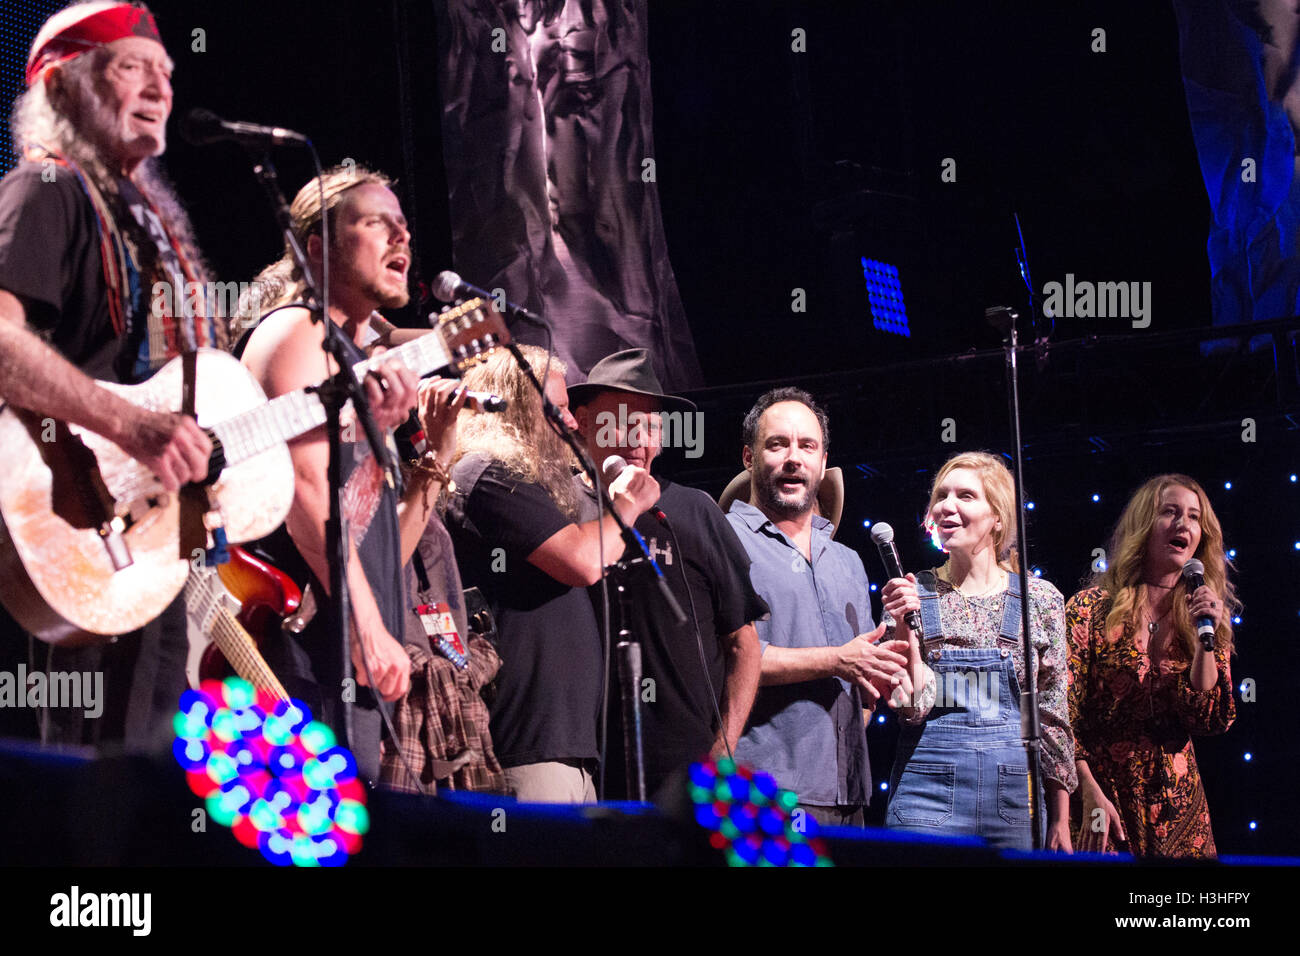 Willie Nelson (L) Lukas Nelson (L) Jamey Johnson (LC), Neil Young (C), Dave Matthews (RC), Alison Krauss (R) and Margo Price (R) on stage for finale at the 2016 Farm Aid at the Jeffy Lube Live in Bristow, VA September 17, 2016 Stock Photo